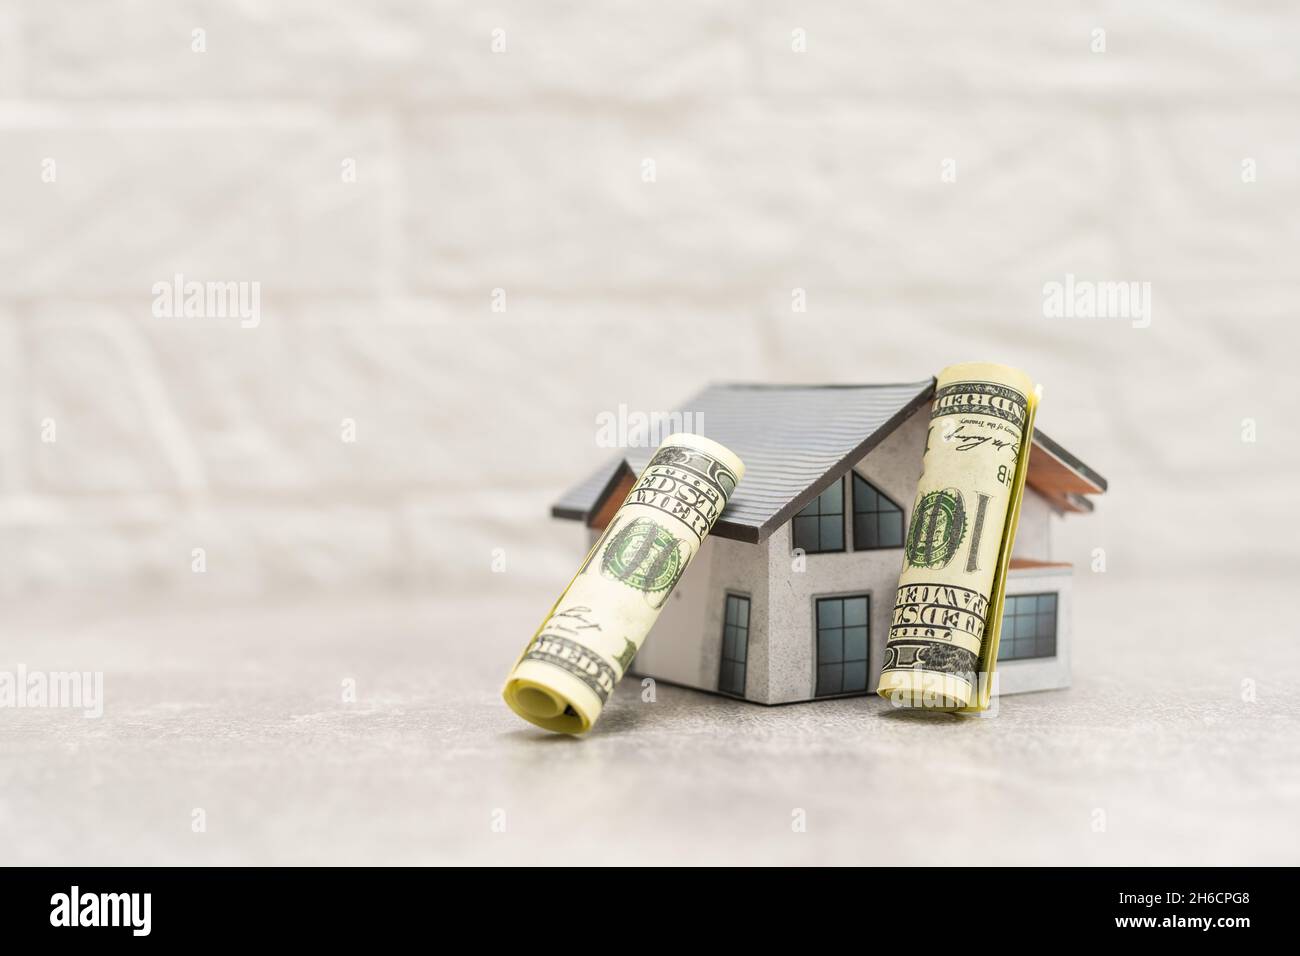 A close up of money and Mock up home, money accumulation, investment, banking or business services, wealth concept, Stock Photo